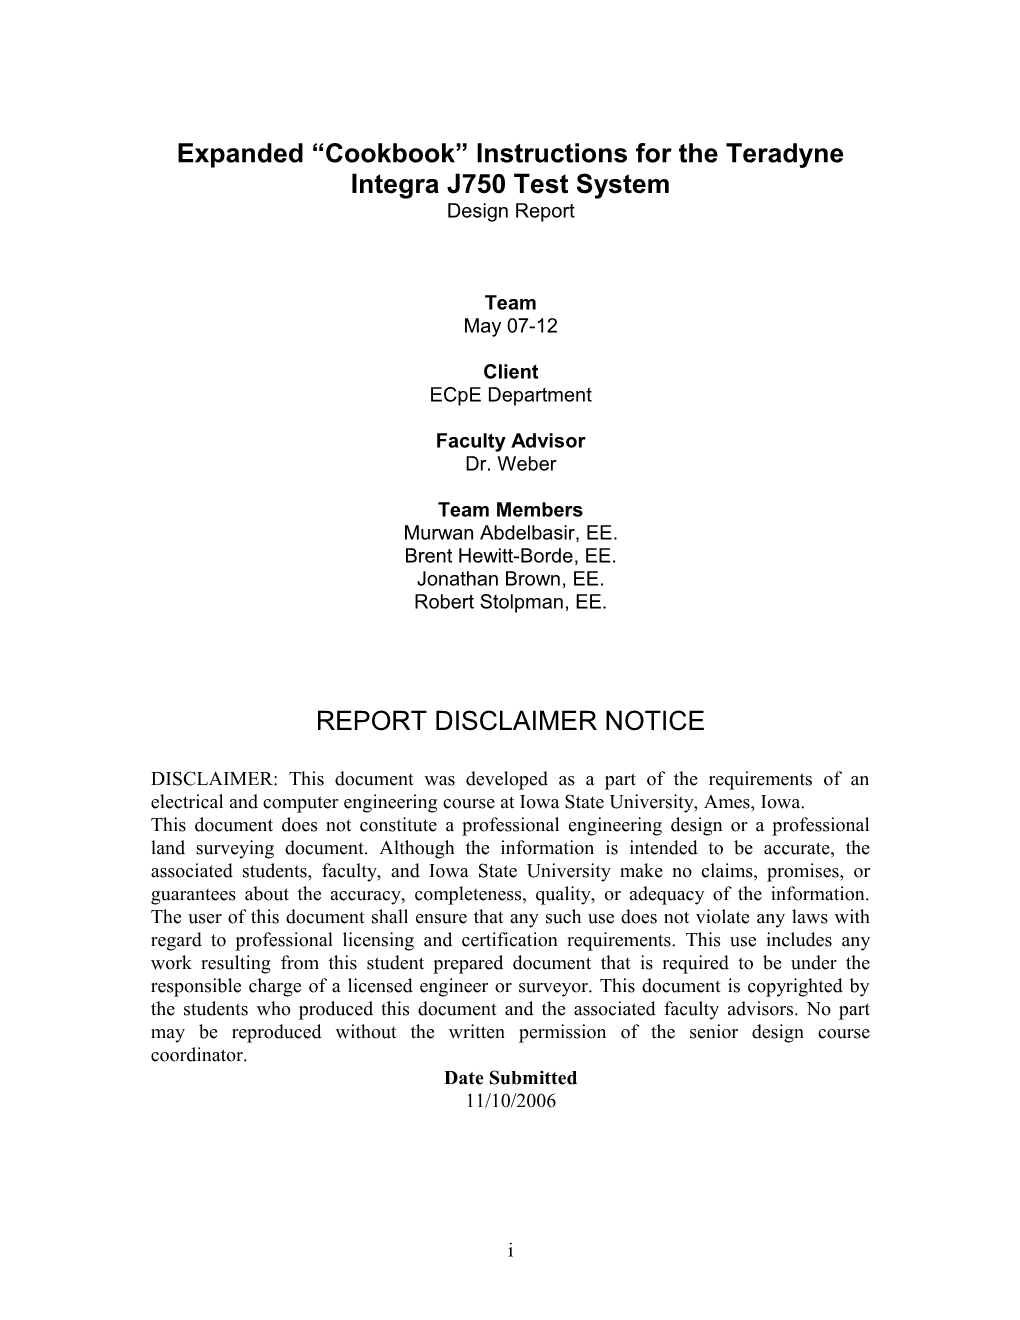 Expanded Cookbook Instructions for the Teradyne Integra J750 Test System